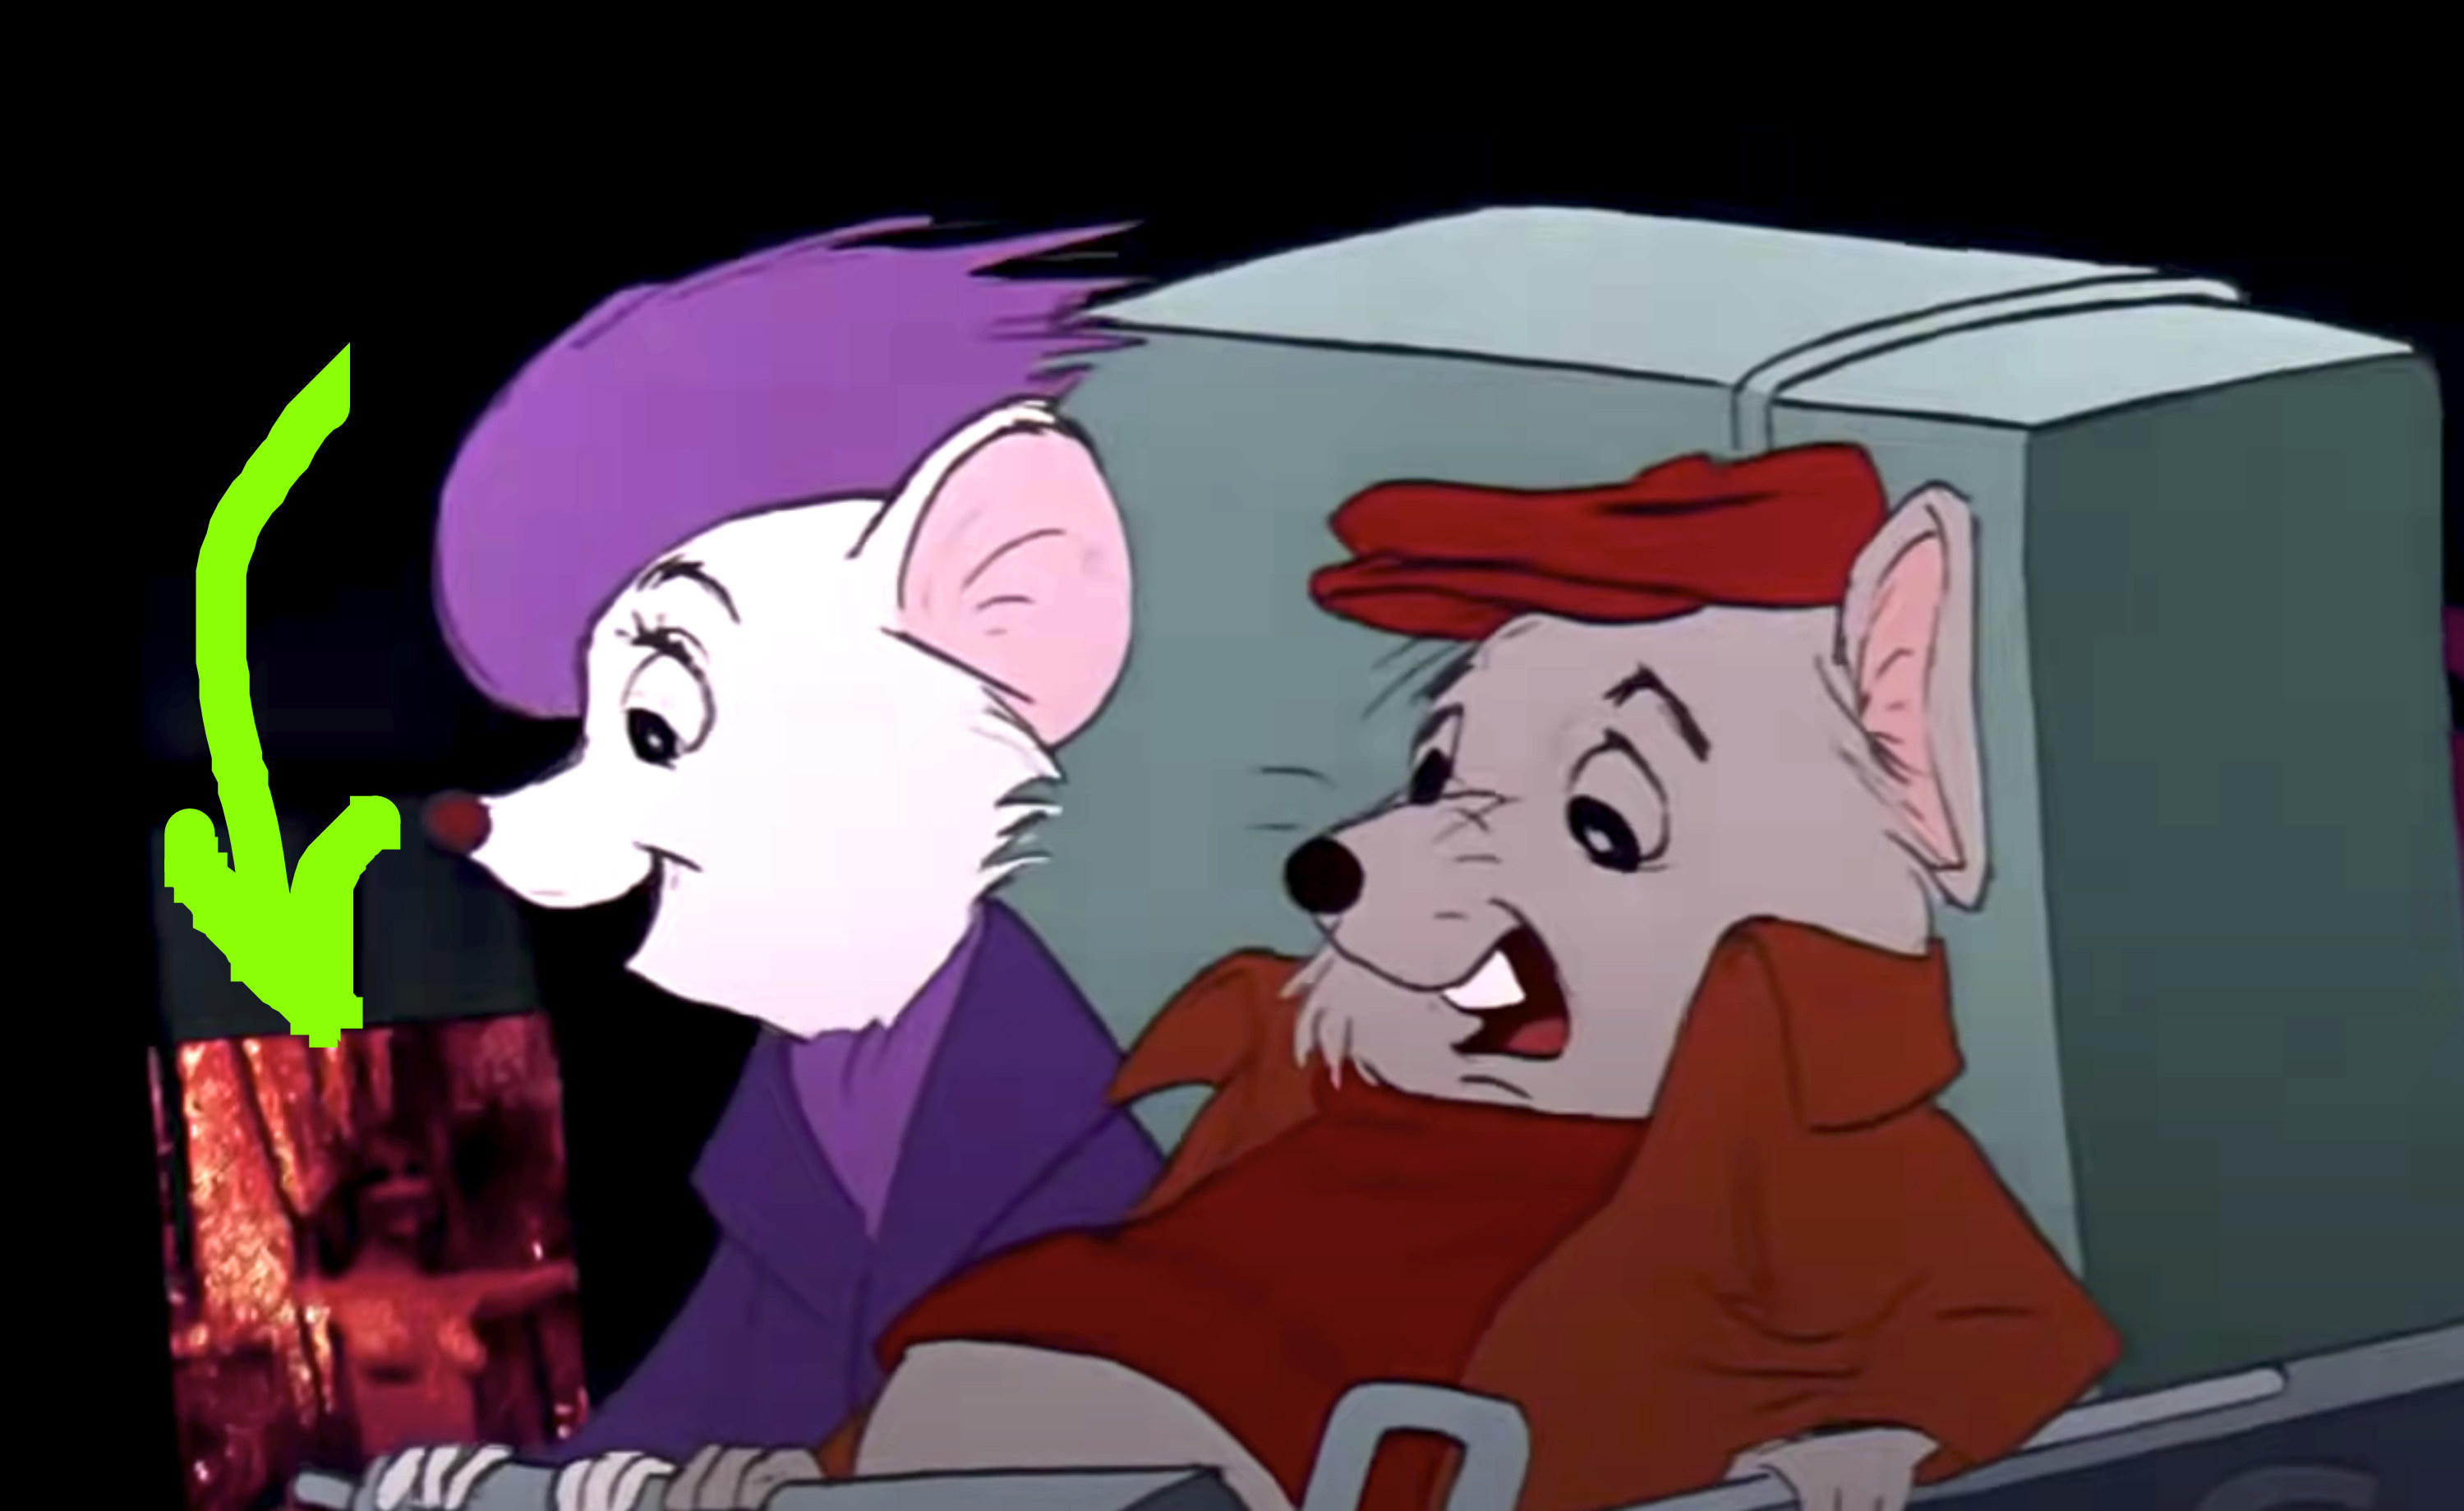 Topless woman in window in the background of The Rescuers